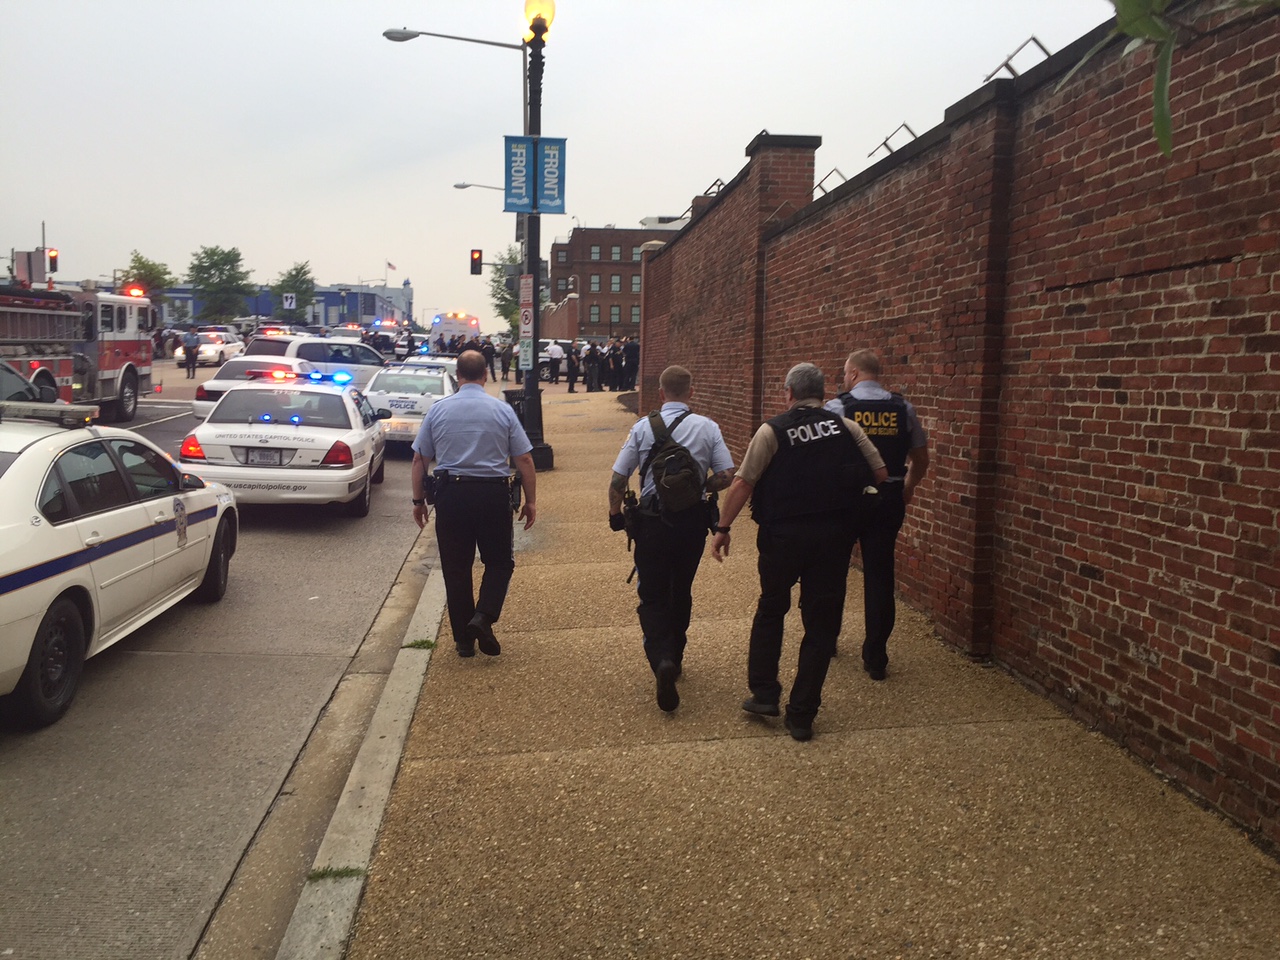 Thursday, July 2, the Navy Yard is on lockdown, according to the Navy Yard office. Employees are sheltering in place. 